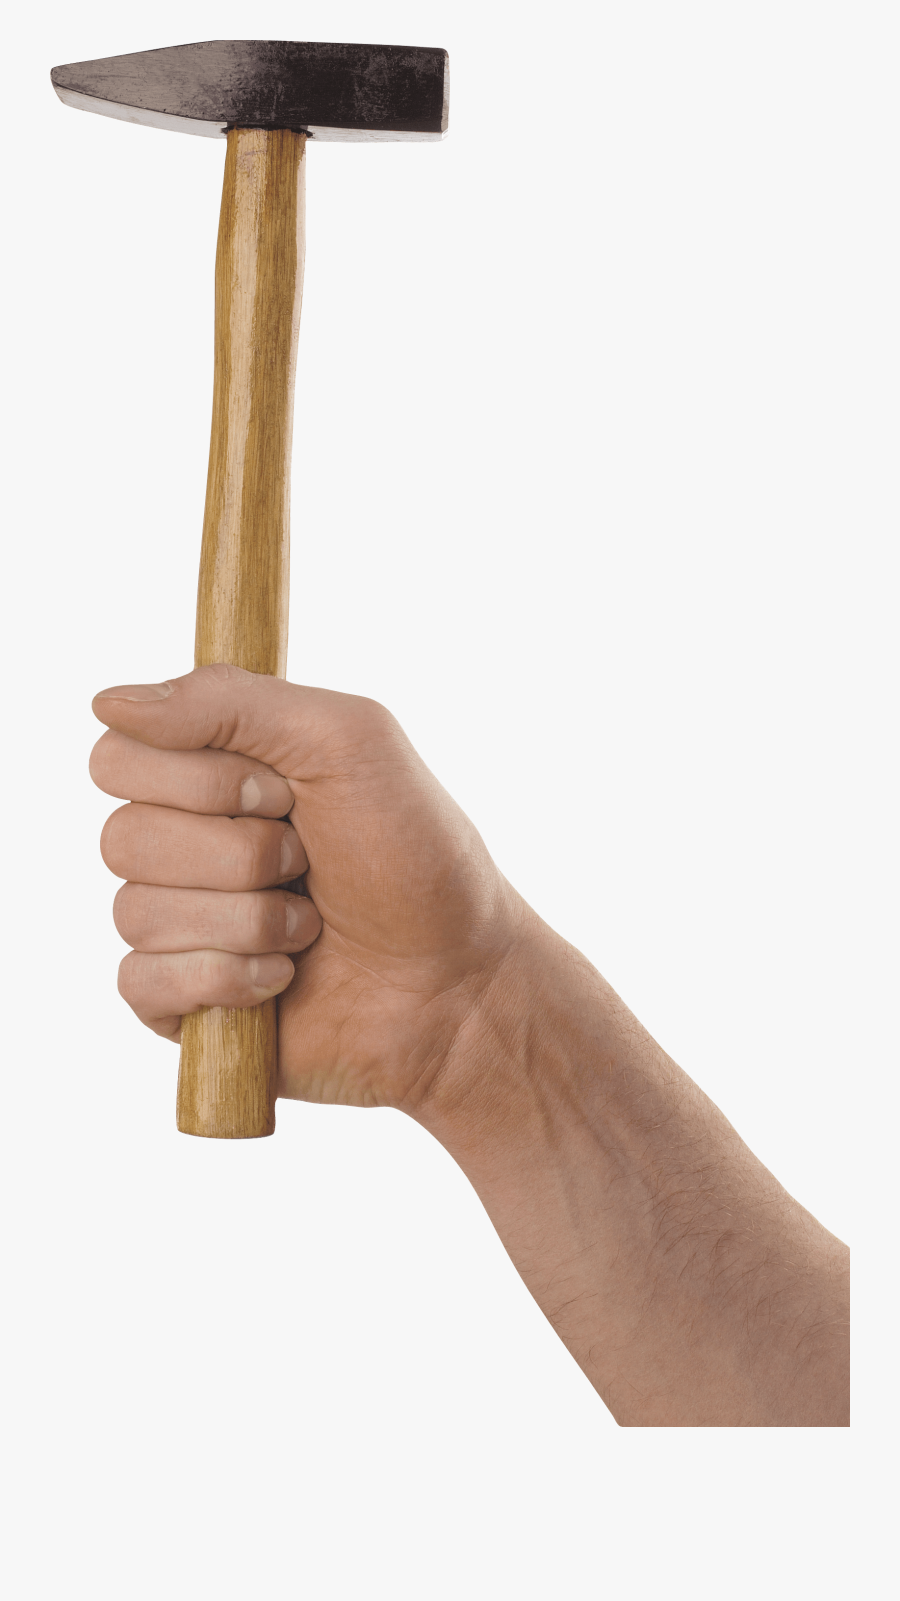 Hand Holding Long Hammer - Hand Holding Hammer Png, Transparent Clipart